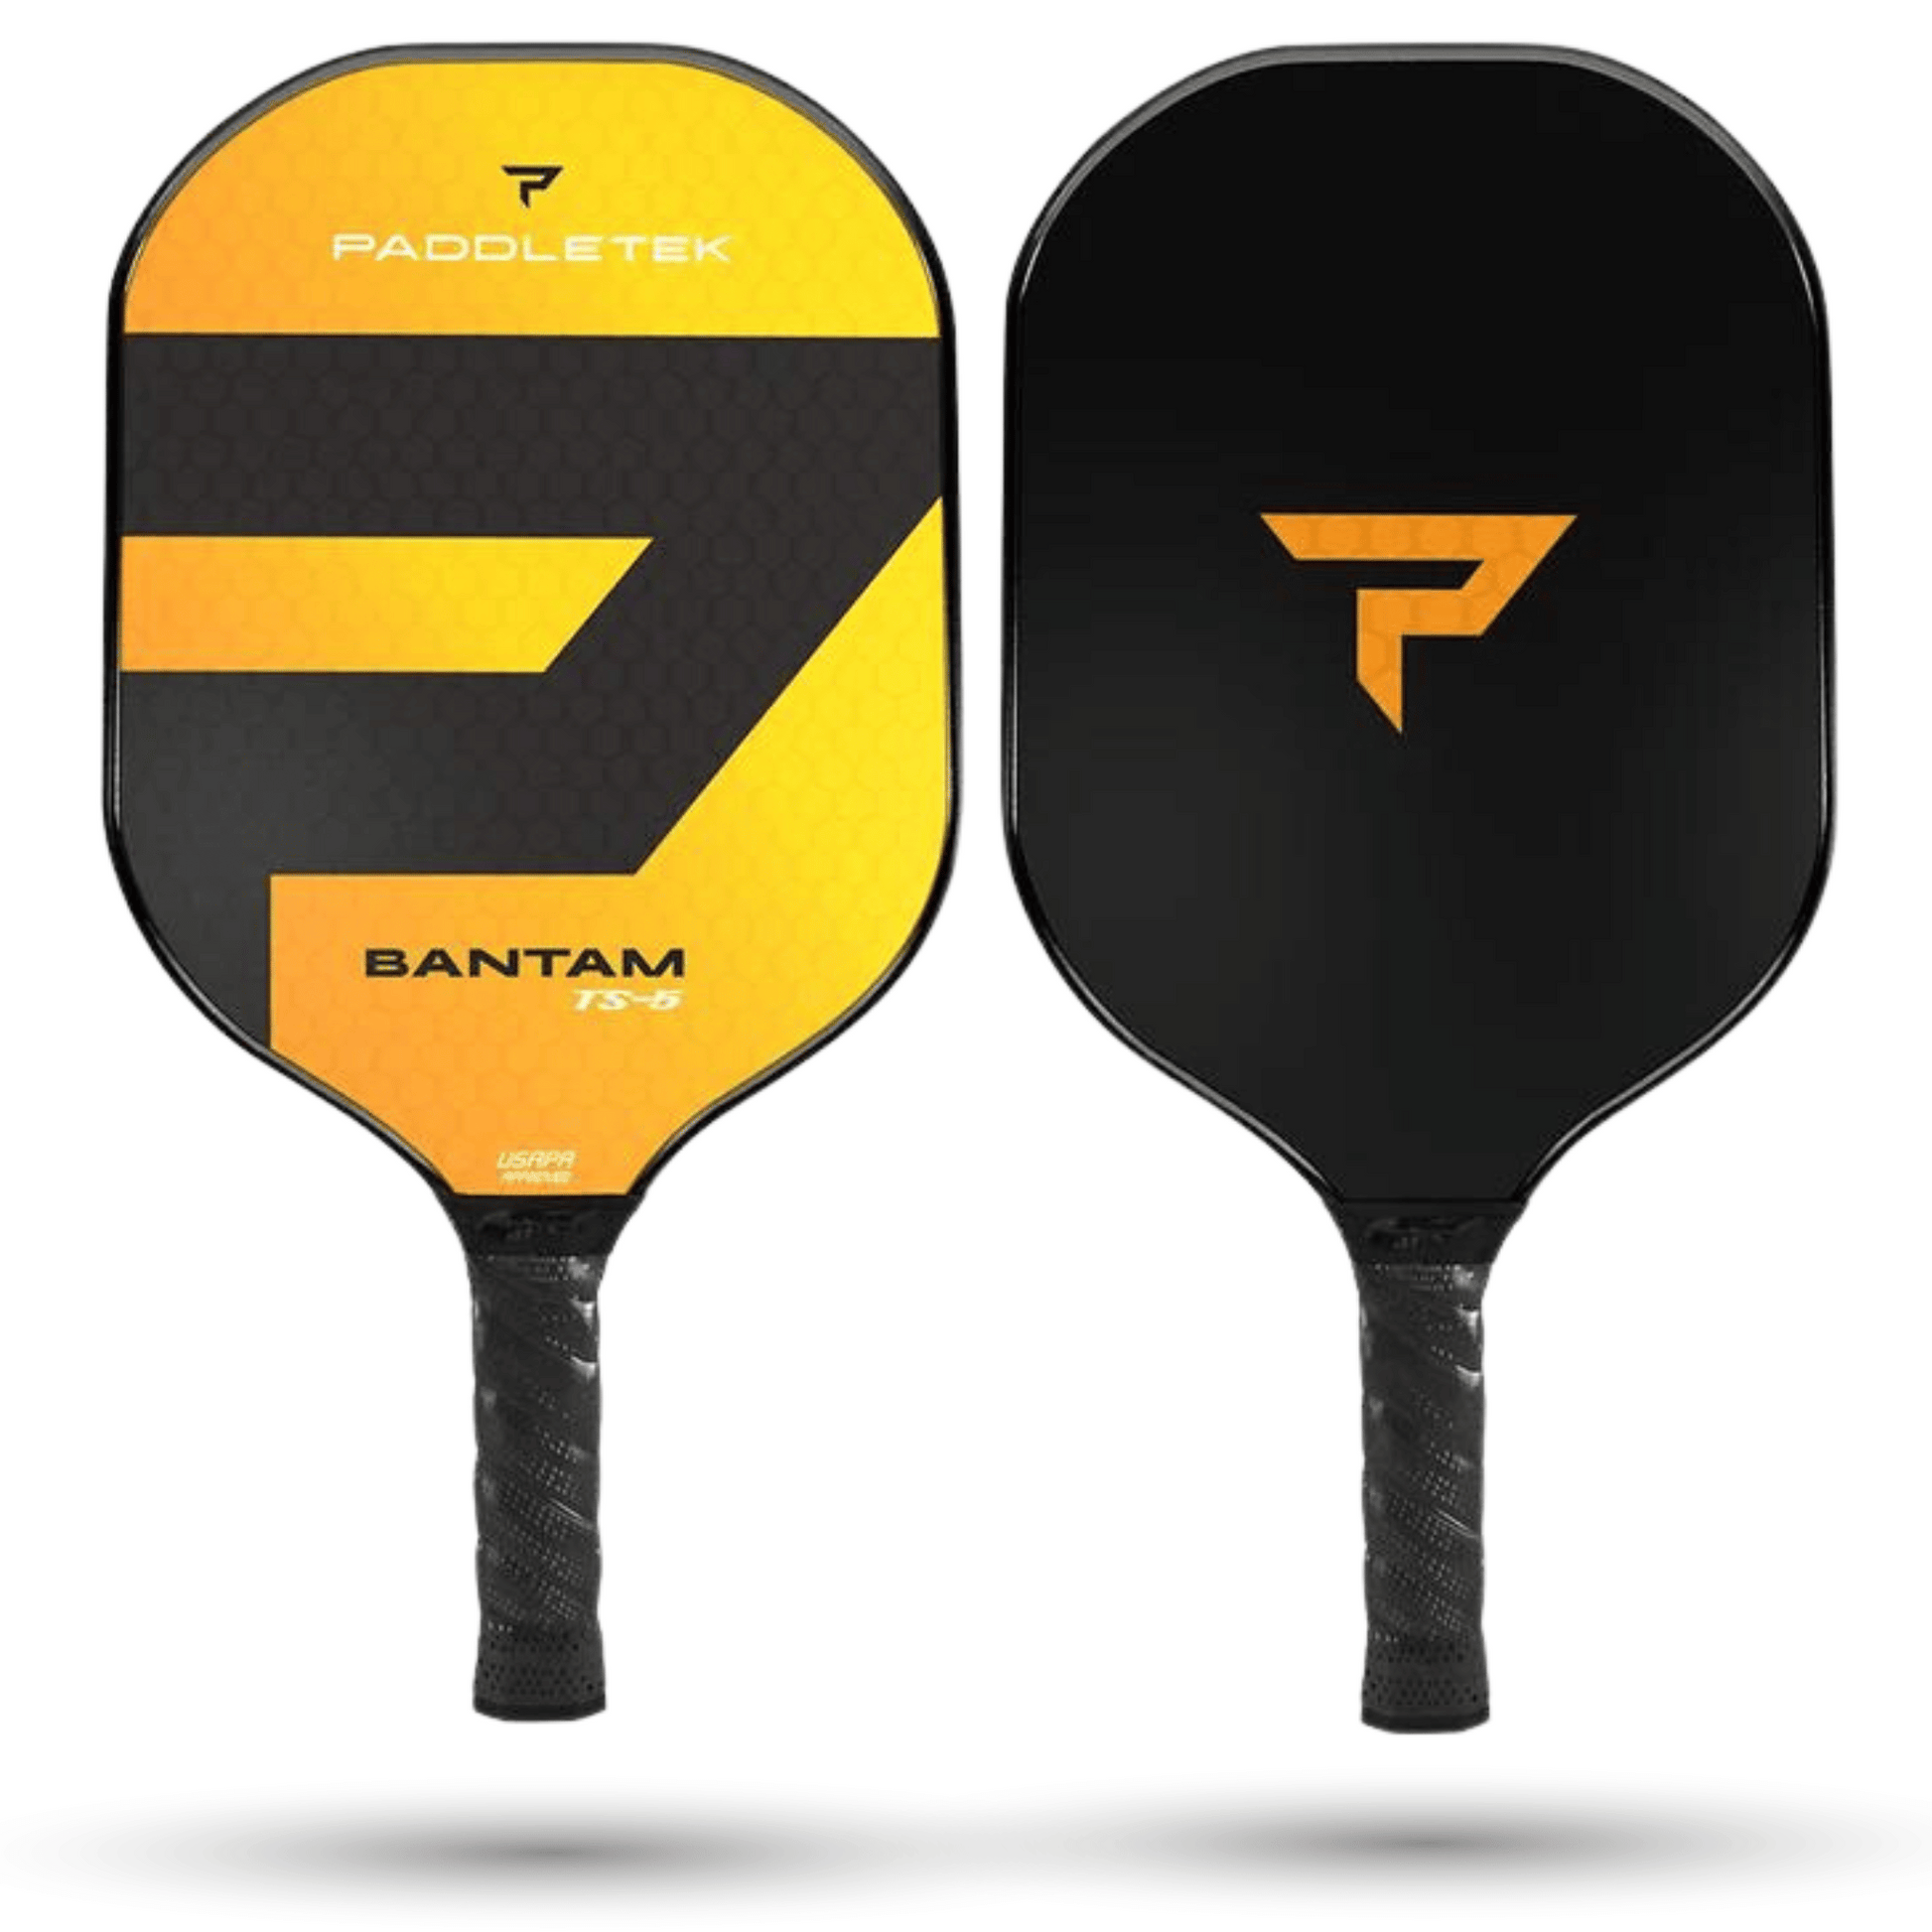 Paddletek TS5 In Horizon Front and Back - The Paddle of Choice for Anna-Leight waters, the Number 1 female player in the world